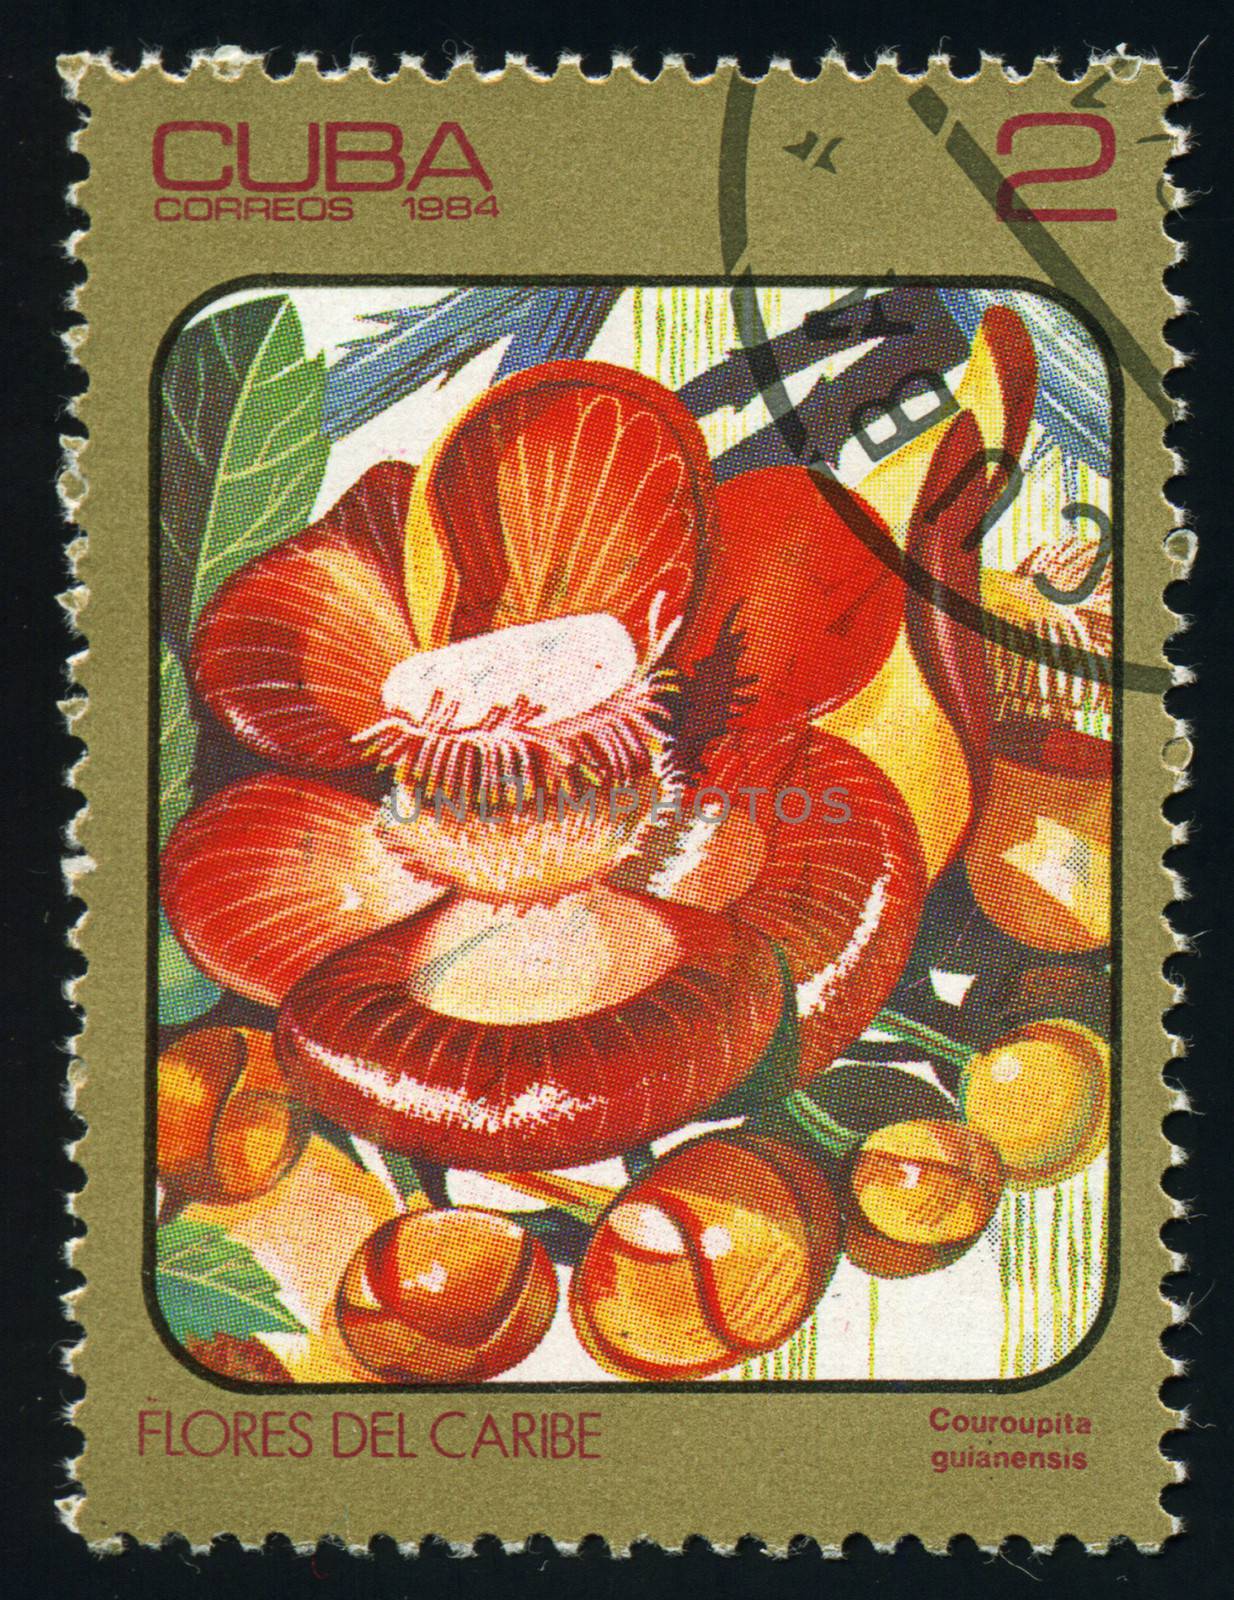 CUBA - CIRCA 1984: post stamp printed in Cuba shows image of couroupita guianensis (cannonball tree) from Caribbean flowers series, Scott catalog 2688 A730 2c, circa 1984